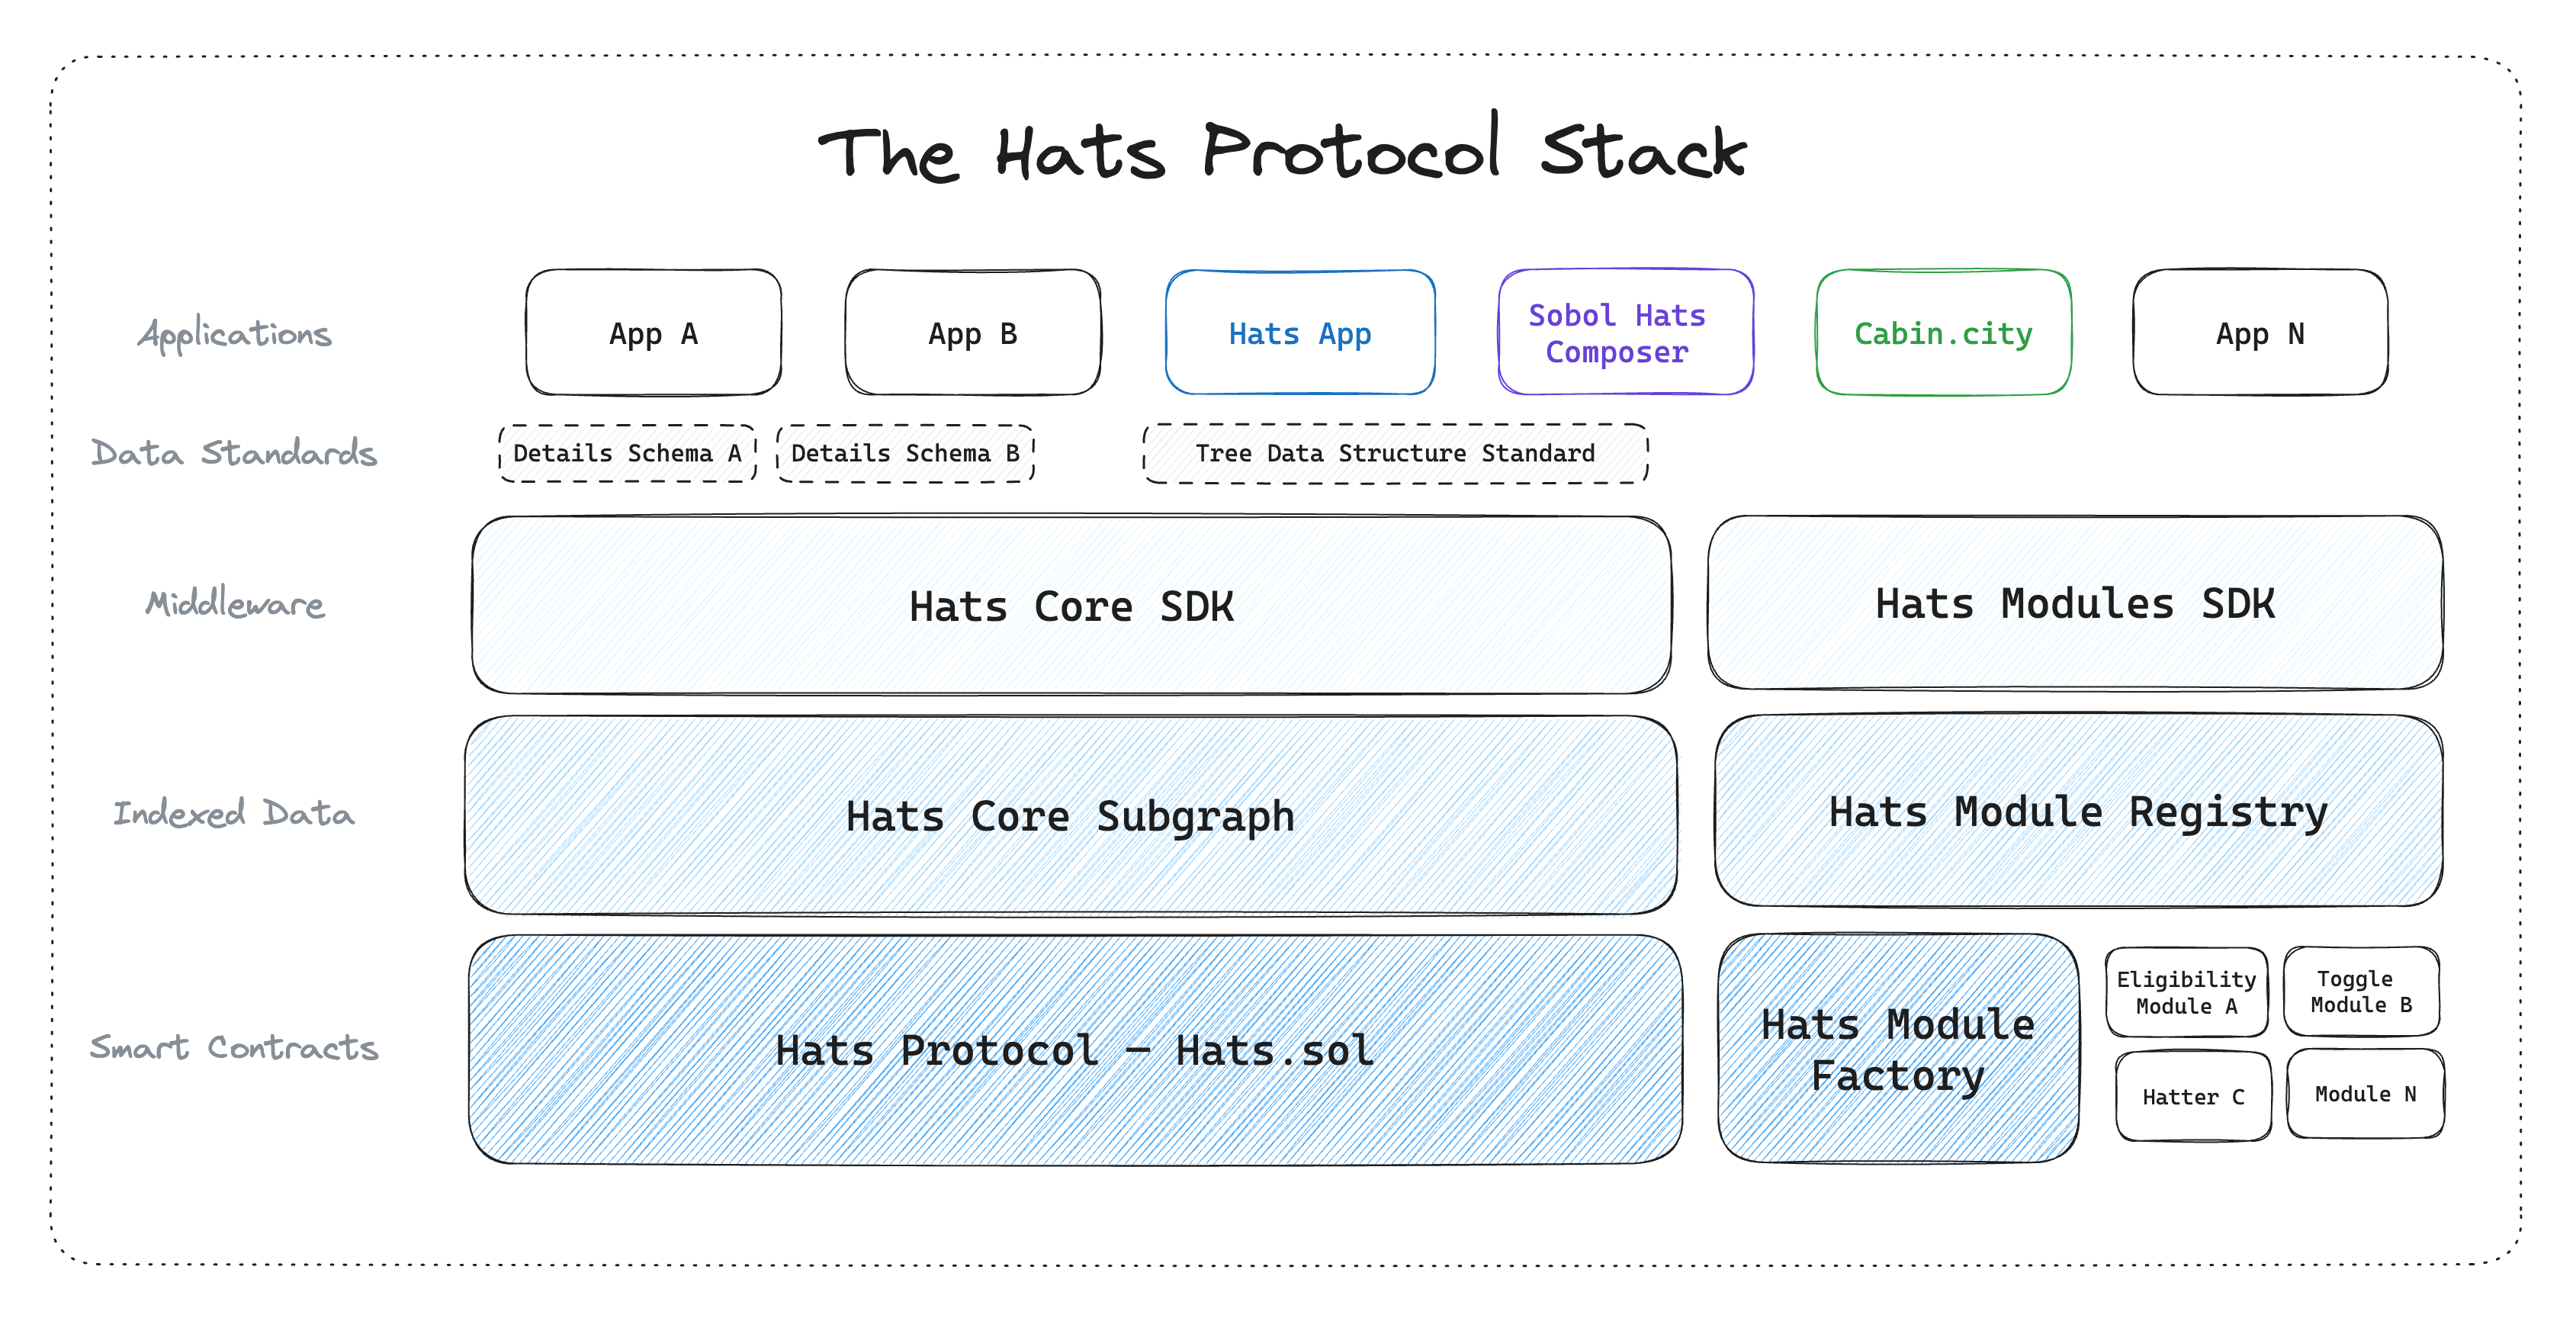 How the Hats Modules system (pictured right) fits into the broader Hats Protocol Stack